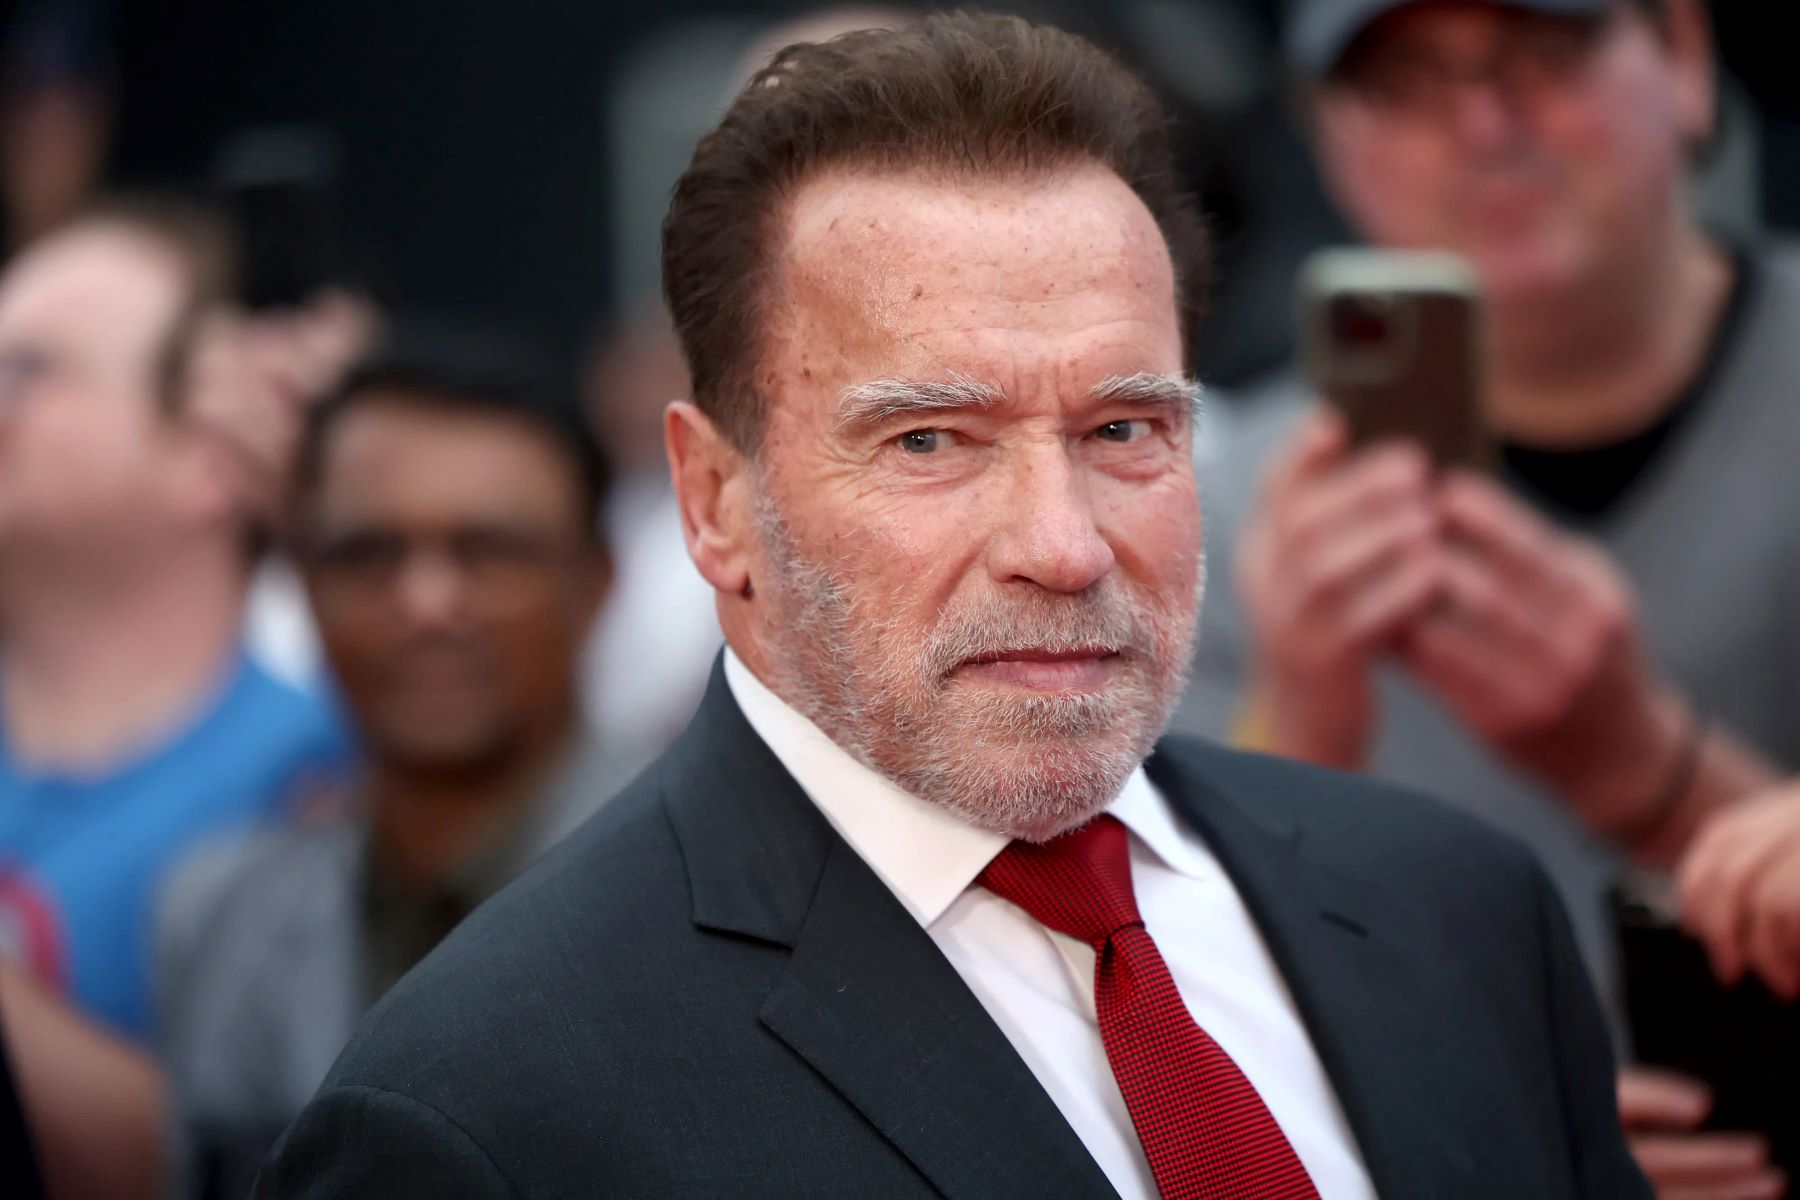 arnold-schwarzenegger-recovering-from-elbow-surgery-takes-temporary-break-from-gym